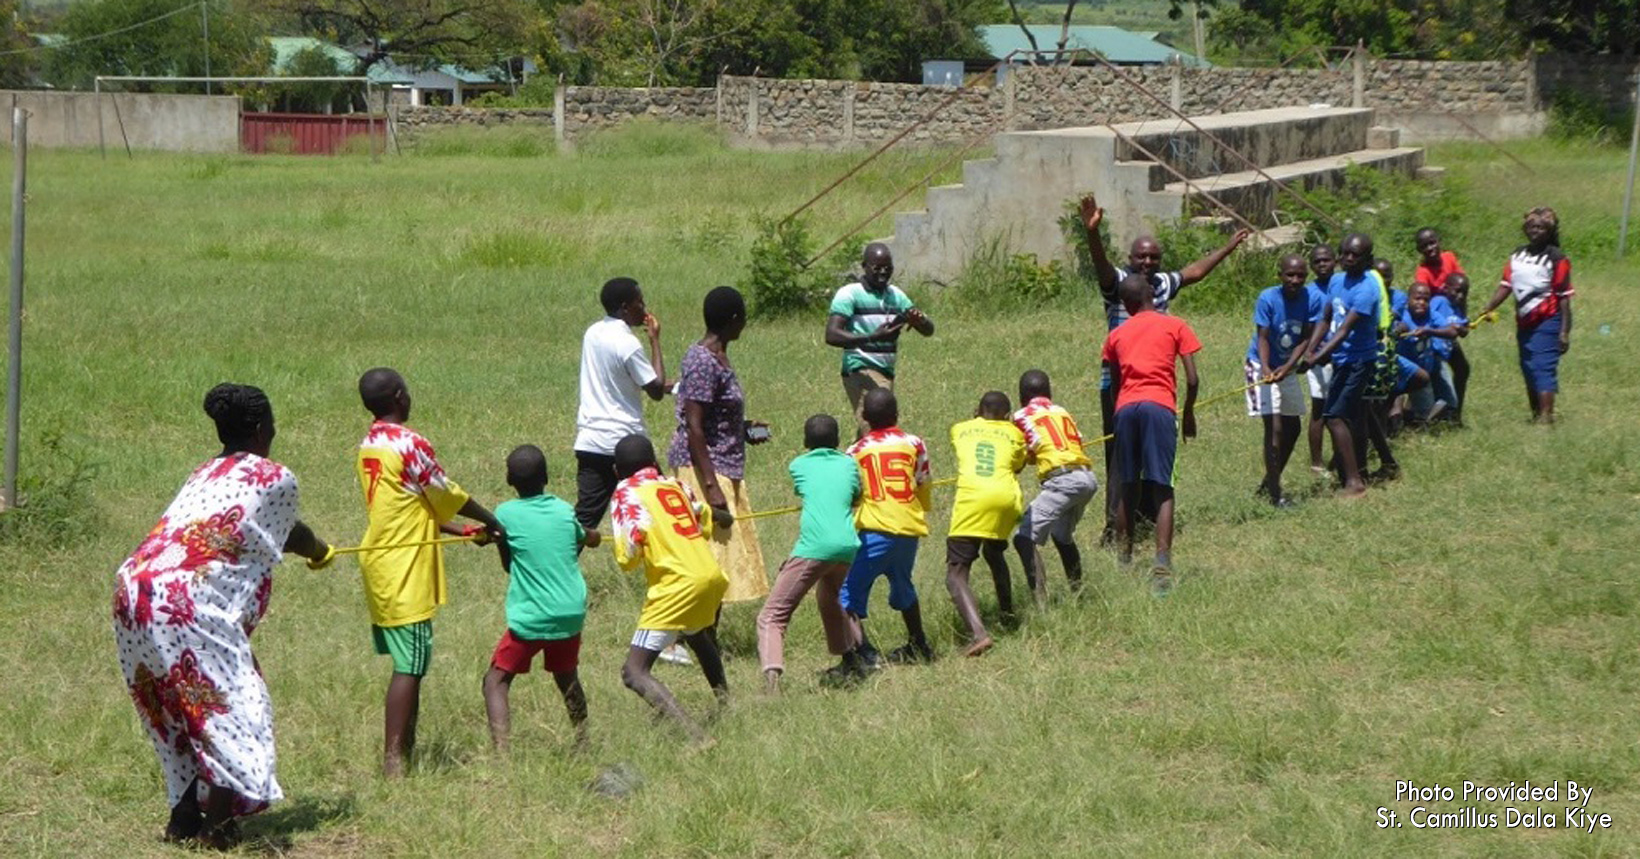 Children play games in a grassland area of the campus.